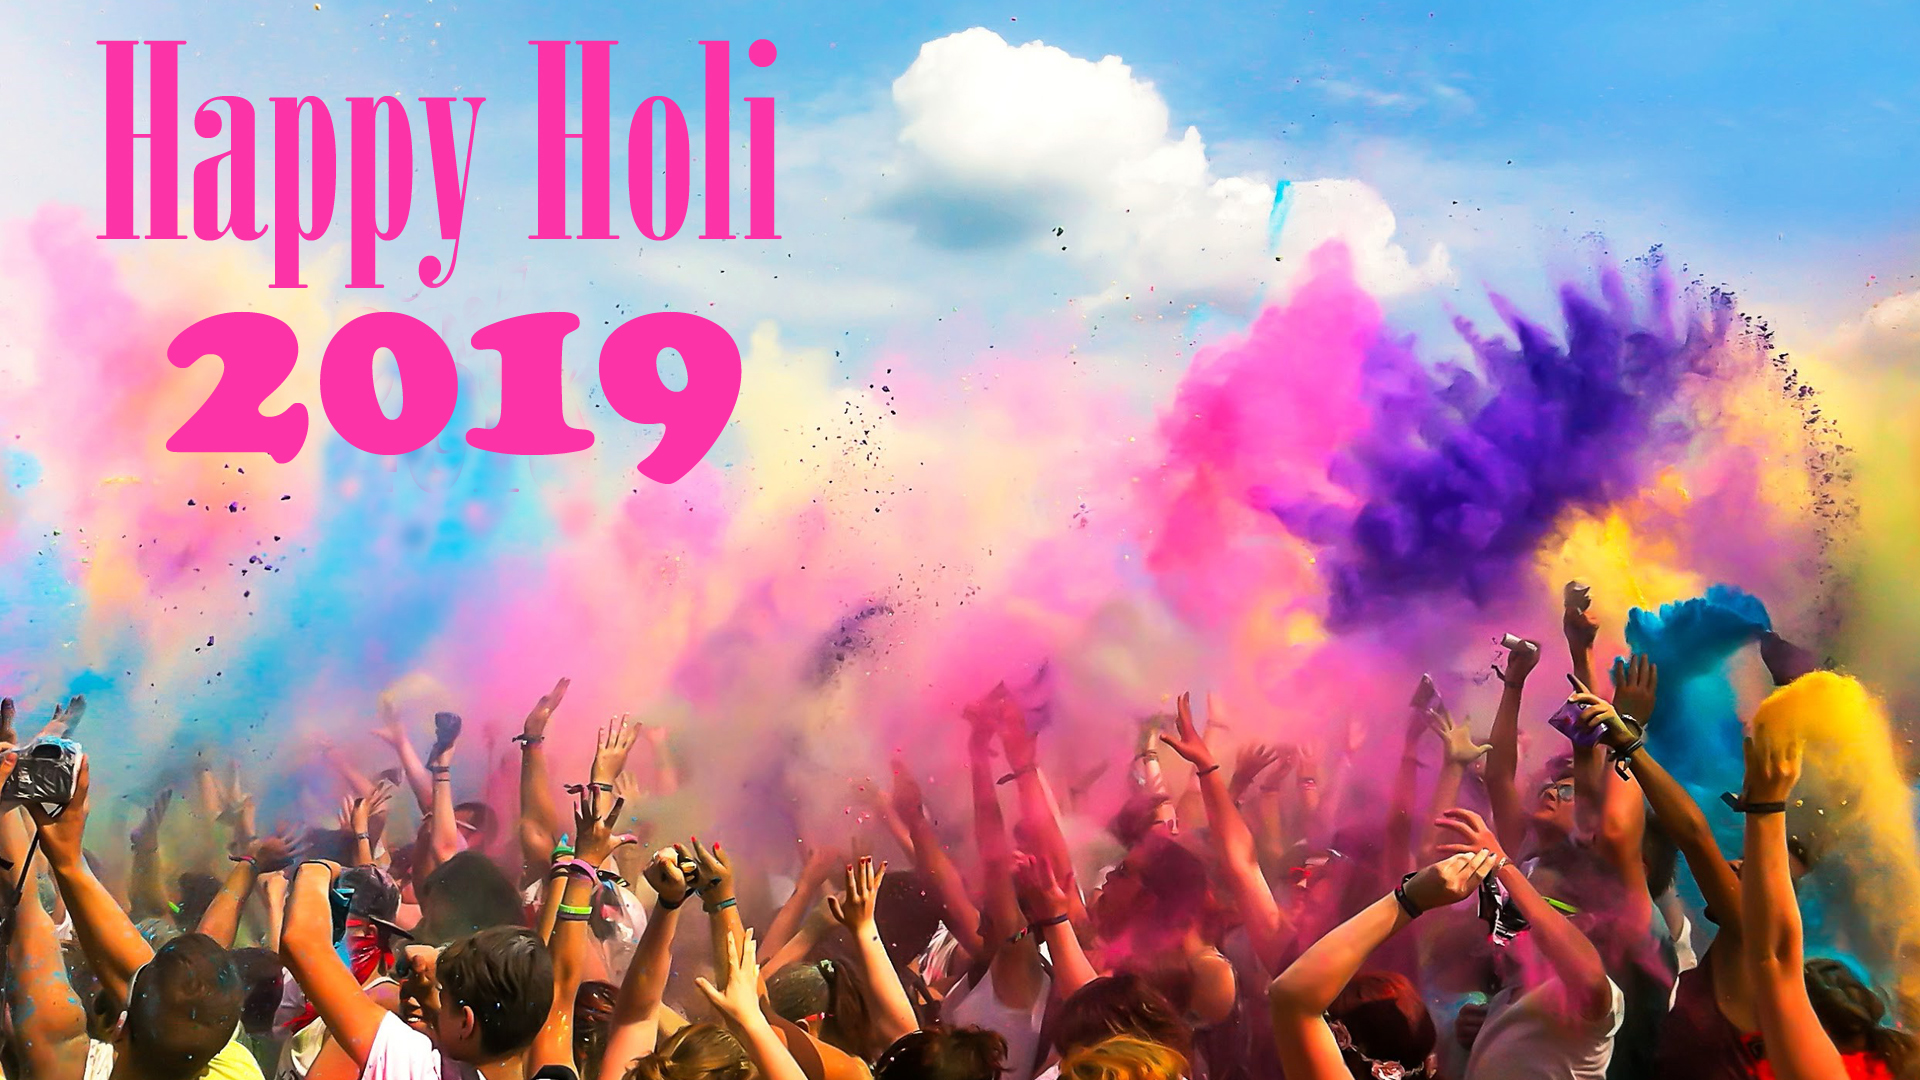 holi wallpaper hd 1080p,crowd,event,performance,party,festival